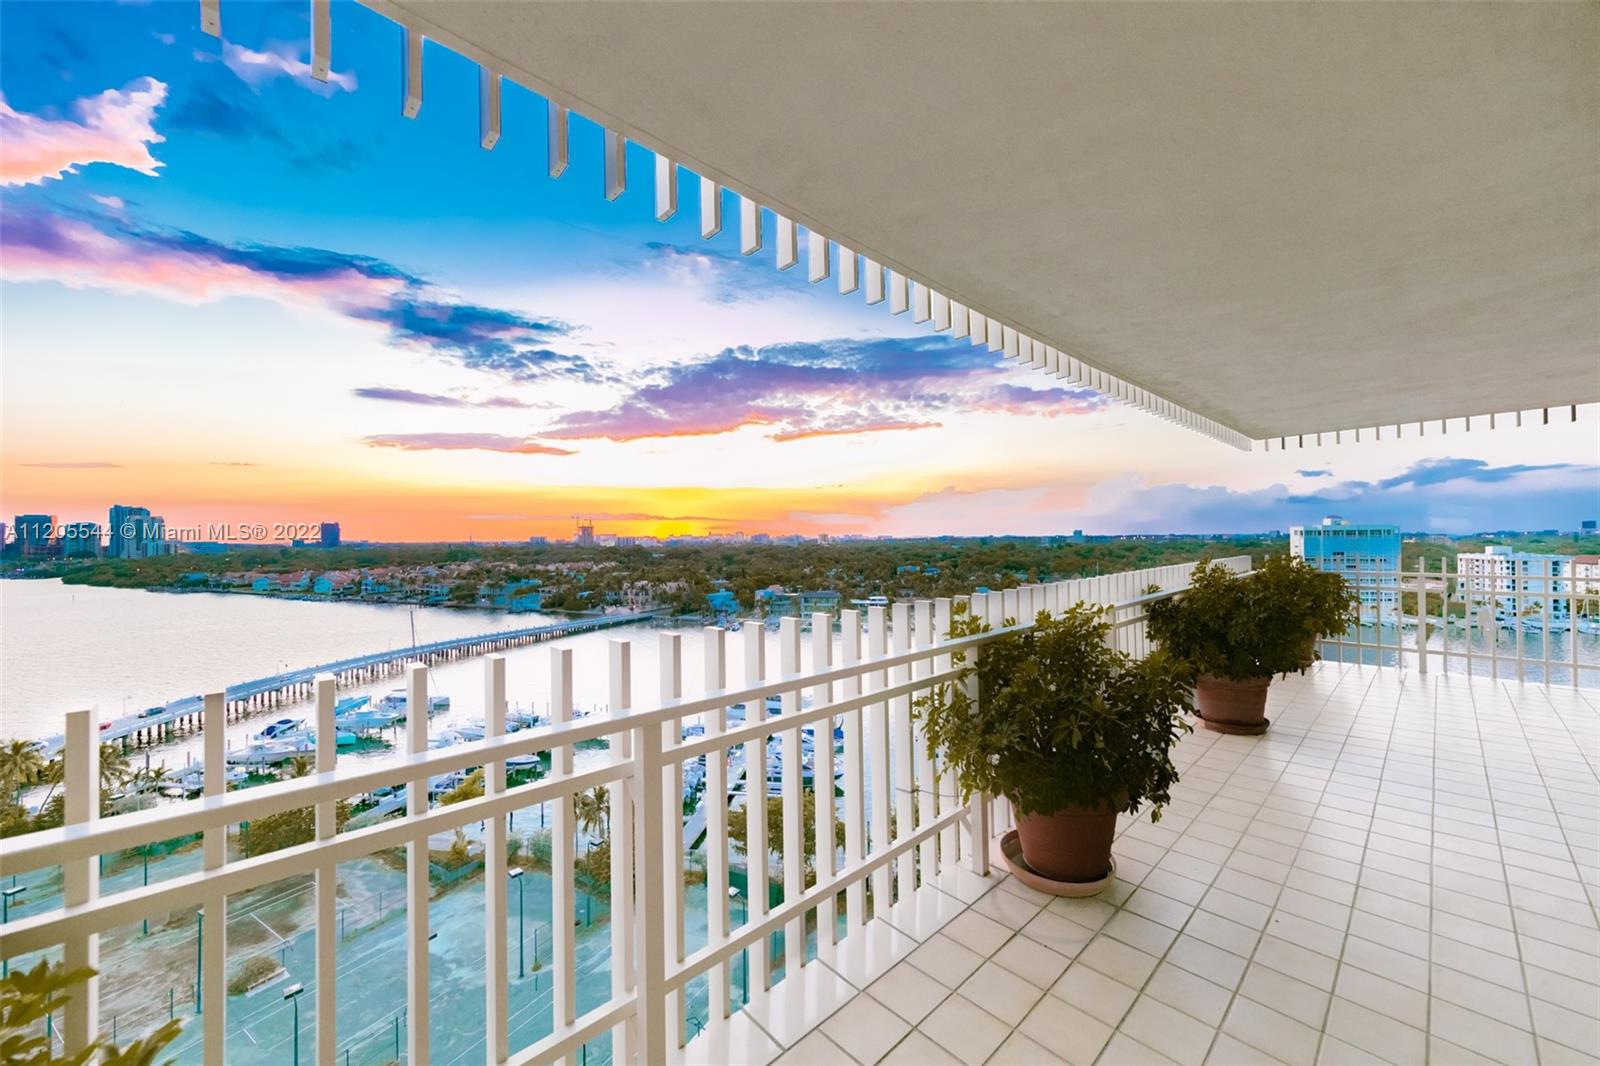 Live on the only tropical private island in Coconut Grove, enjoy the best sunrise and sunsets in this fabulous 2,424 SQ. FT.  3 bedroom, 2 1/2 bath condo on the 14th floor. Spacious living area, large bedrooms, great balcony with unobstructed views of the bay and Miami’s skyline!!. The maintenance fee is only $1.19 per square foot.